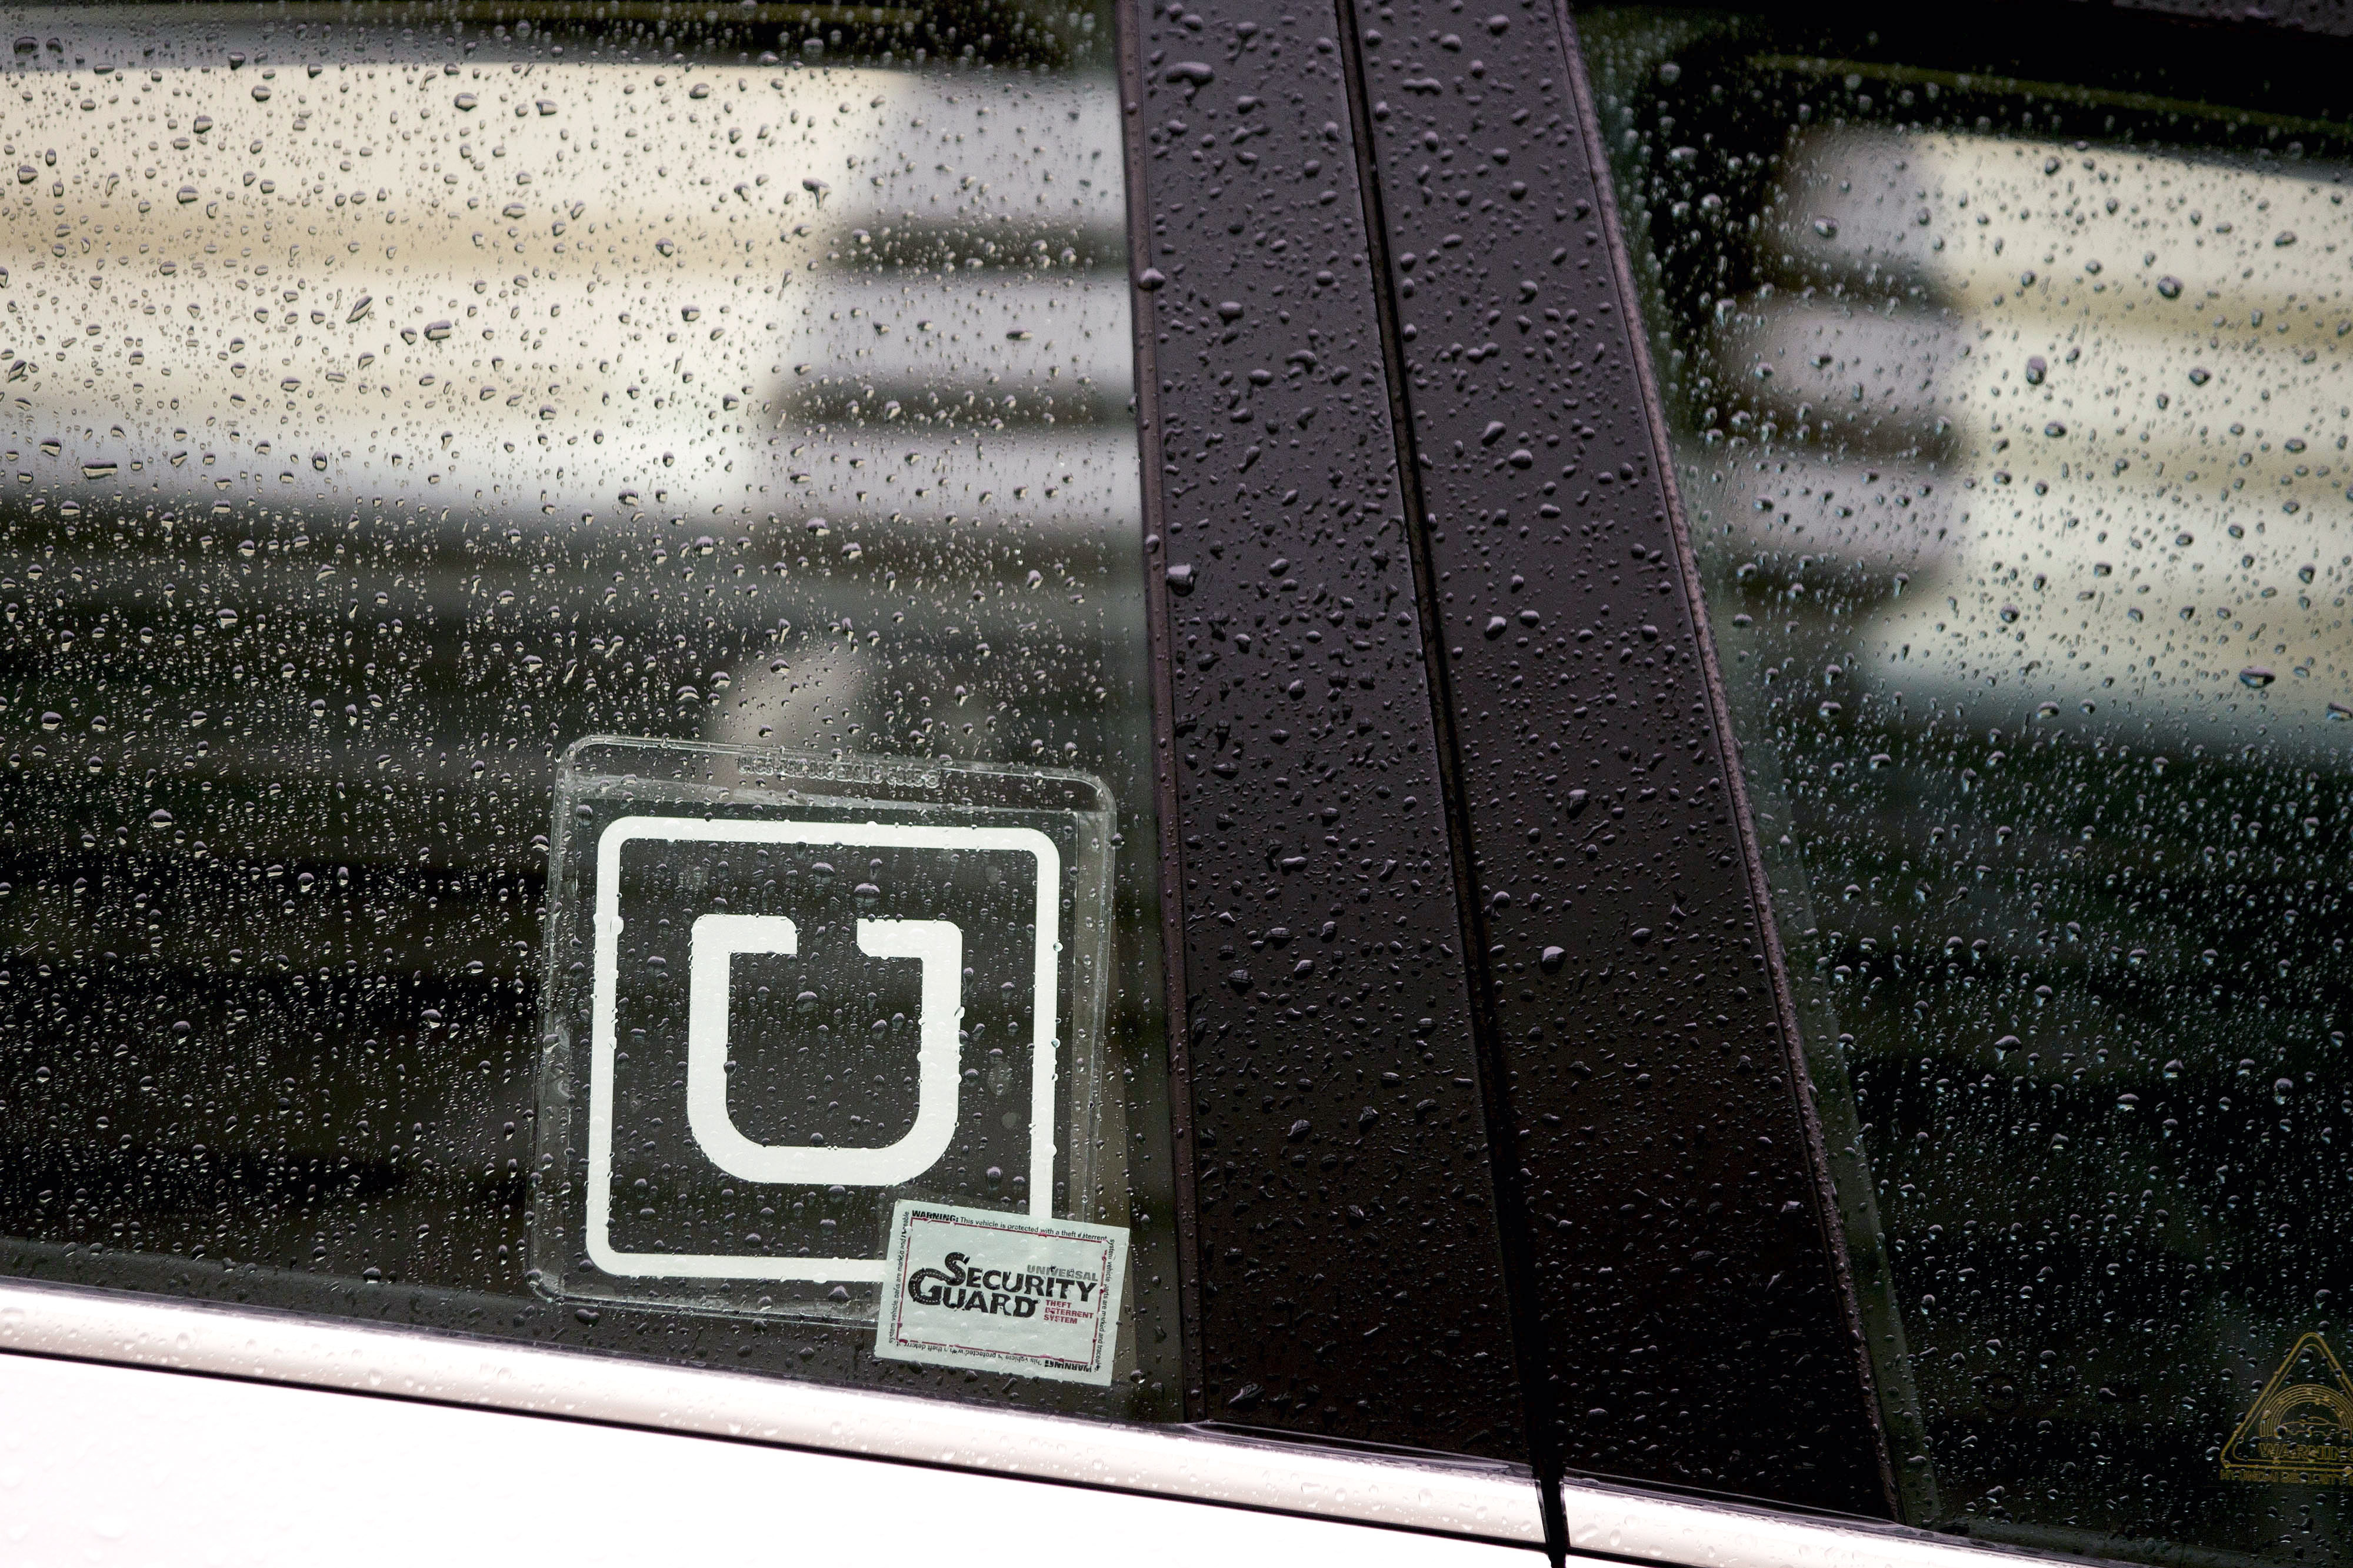 The Uber Technologies Inc. logo is displayed on the window of a vehicle after dropping off a passenger at Ronald Reagan National Airport (DCA) in Washington, D.C., U.S., on Wednesday, Nov. 26, 2014. (Bloomberg&mdash;Bloomberg via Getty Images)